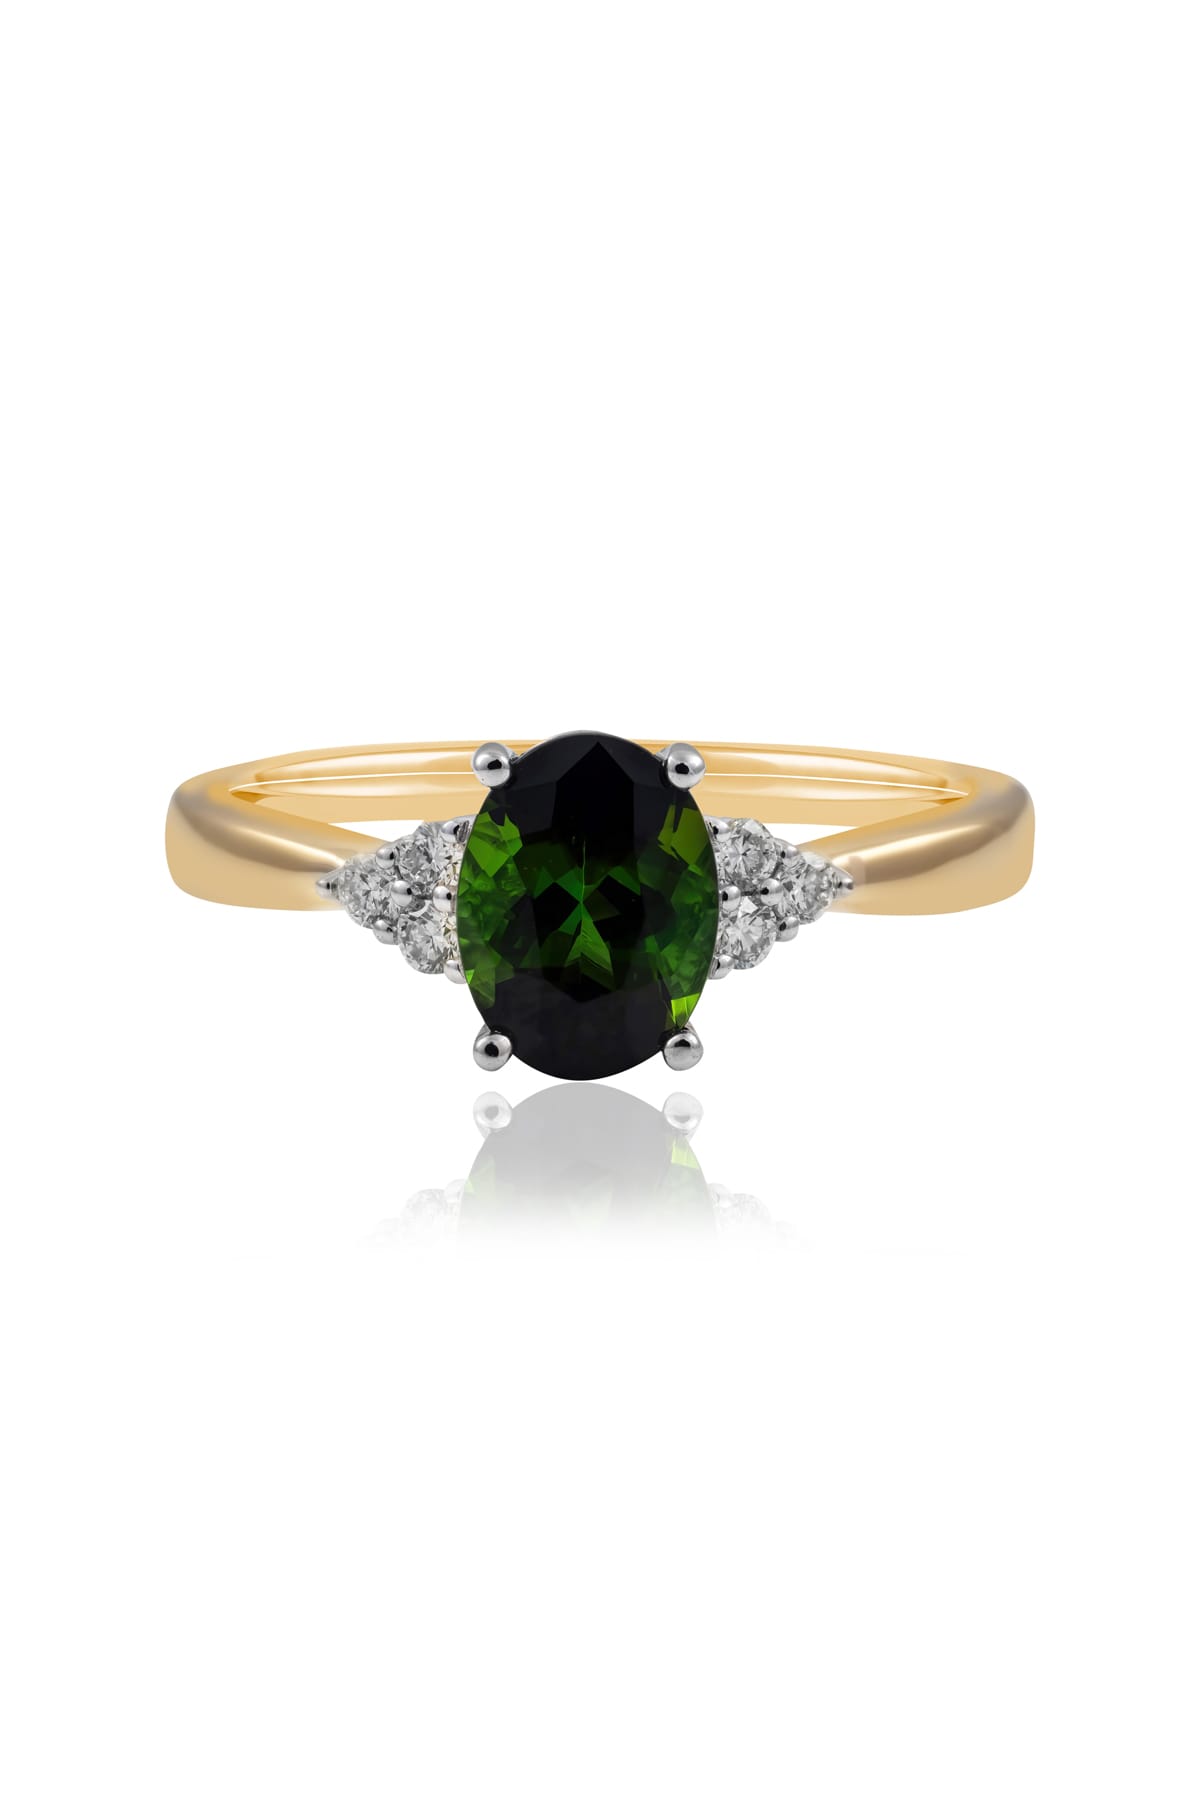 1.27ct Oval Green Tourmaline And Diamond Ring Set In Gold from LeGassick.